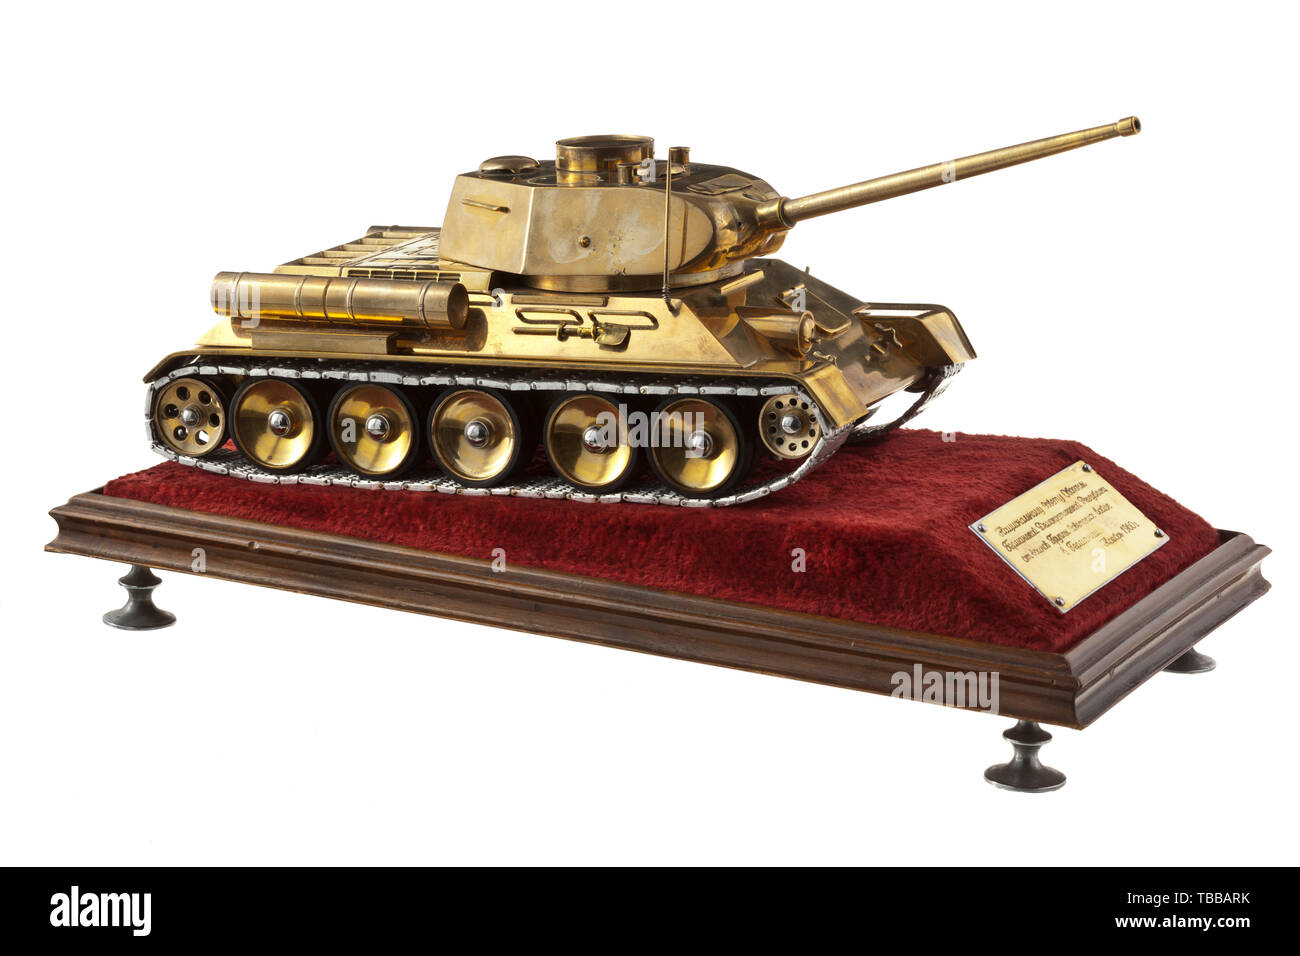 A T 34 tank model as a gift of honour to the Nationale Verteidigungsrat der DDR (East German National Defence Council) from 1960, Brass, shining like gold, polished and varnished. Rotatable turret, movable antenna, indicated front machine gun, movable tracks (rubber coating, light metal chains). On presentation pedestal covered with red velvet-like material a dedication plaque with Cyrillic engraving (tr.) 'To the National Defence Council of East Germany from the Soviet troops stationed in Germany, November 1960'. Handled with great care, light usage and age marks. Displaye, Editorial-Use-Only Stock Photo